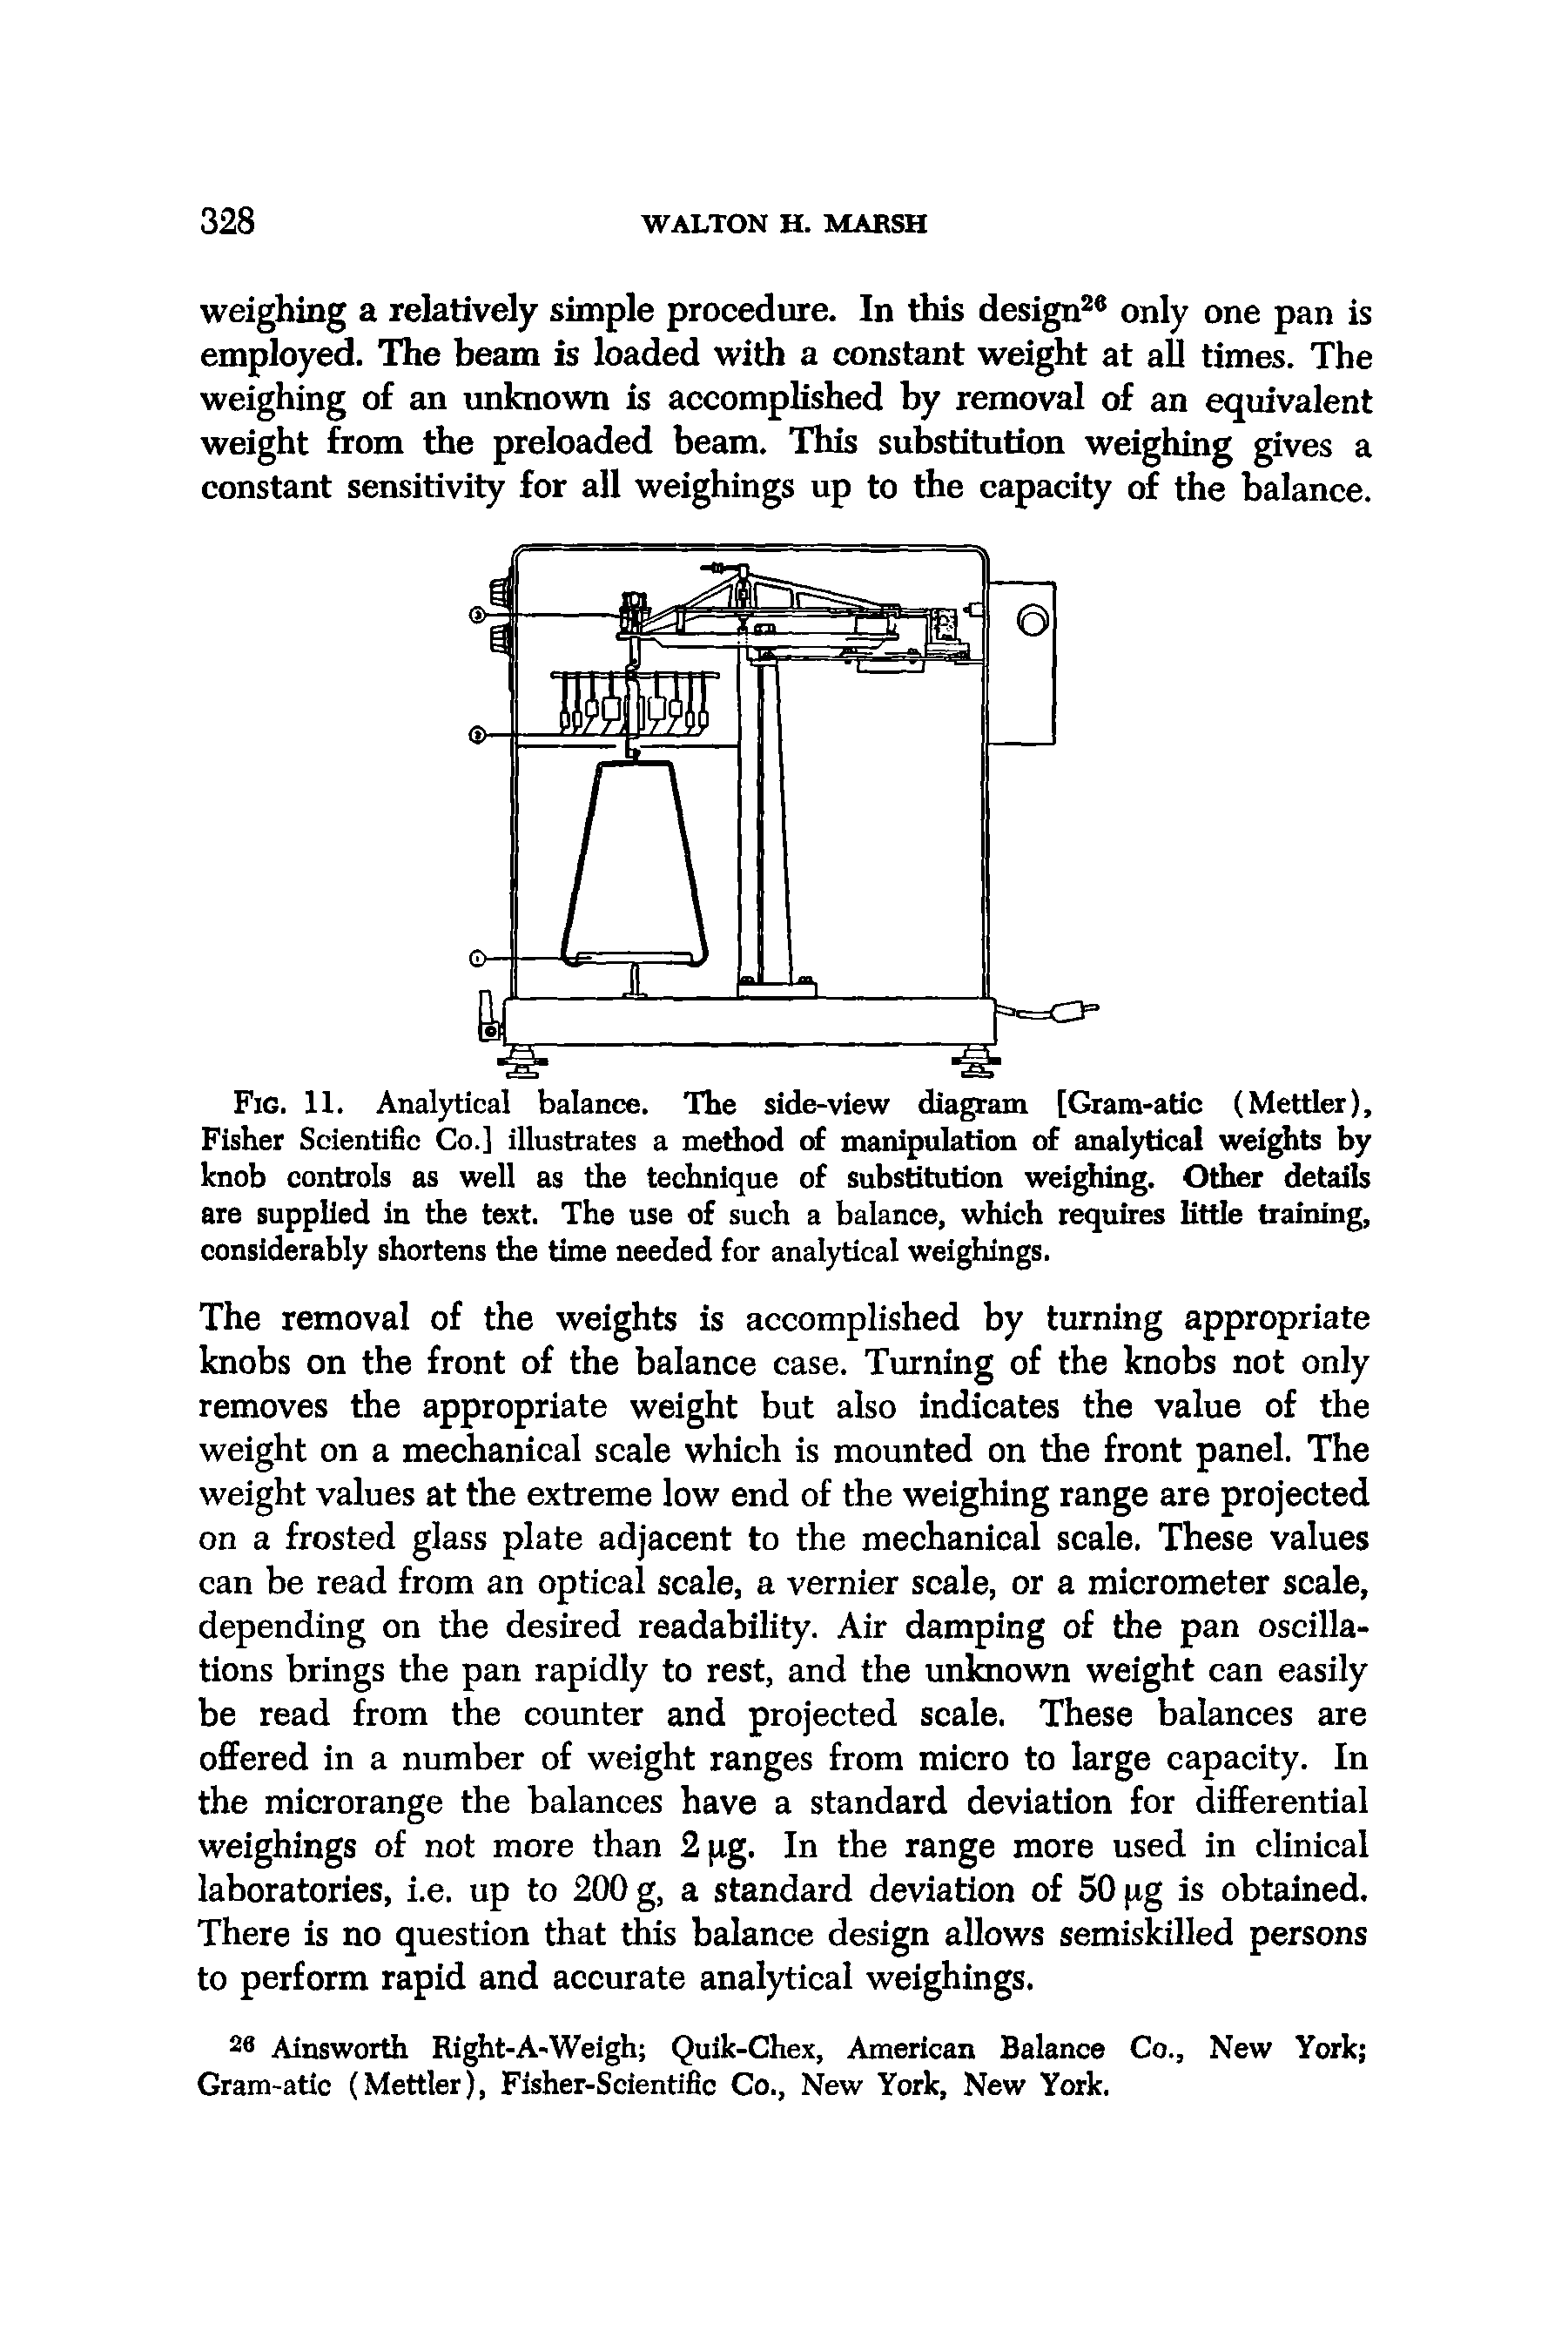 Fig. 11. Analytical balance. The side-view diagram [Gram-atic (Mettler), Fisher Scientific Co.] illustrates a method of manipulation of analytical weights by knob controls as well as the technique of substitution weighing. Other details are supplied in the text. The use of such a balance, which requires little training, considerably shortens the time needed for analytical weighings.